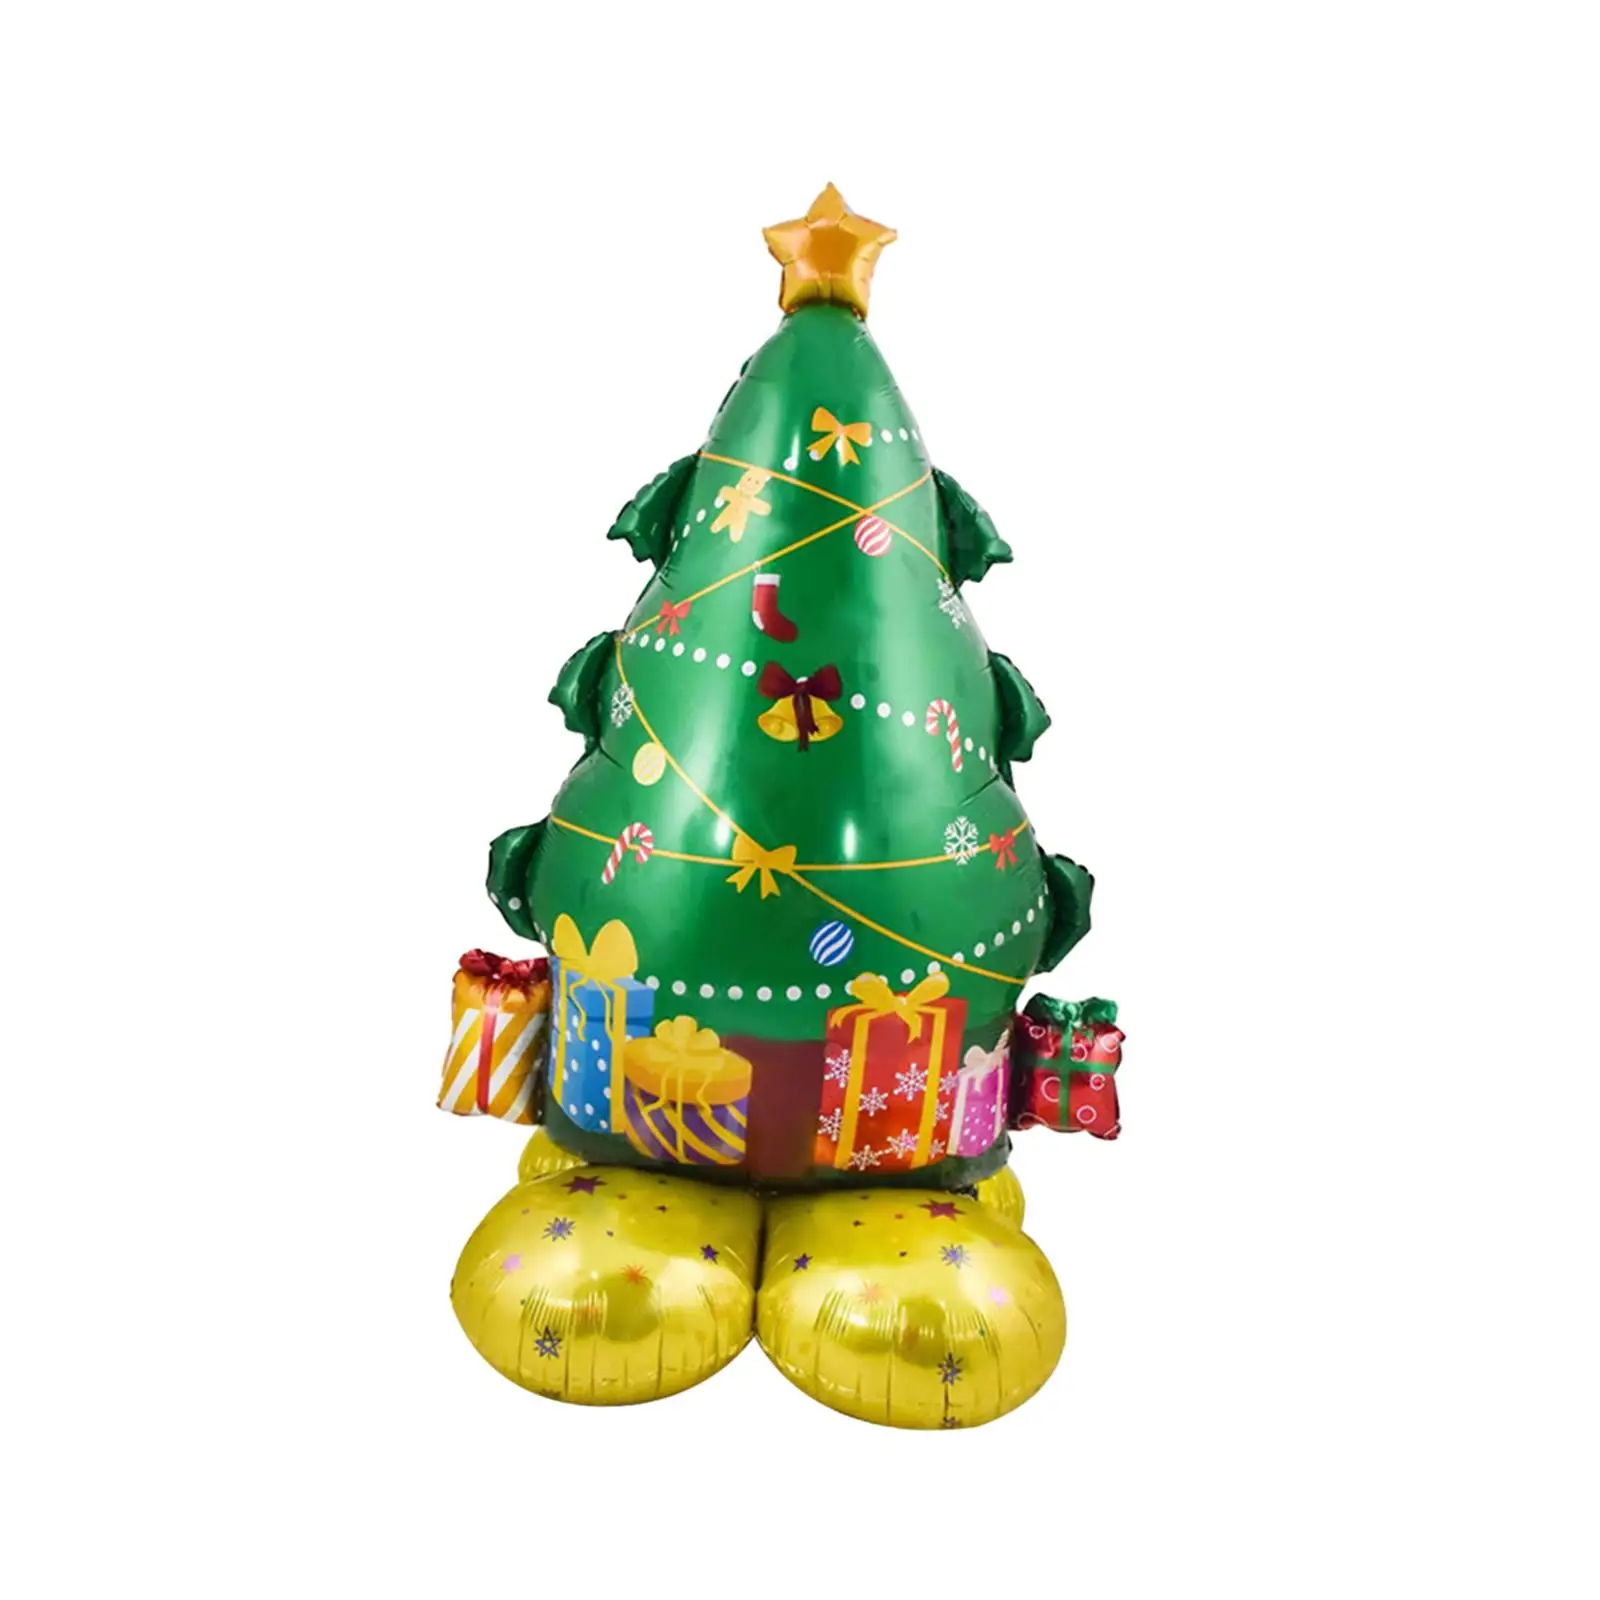 Large Christmas Balloon Kids Adults Decorative Novelty Toy Standing Balloon for Birthday Party Supplies Halloween Festival